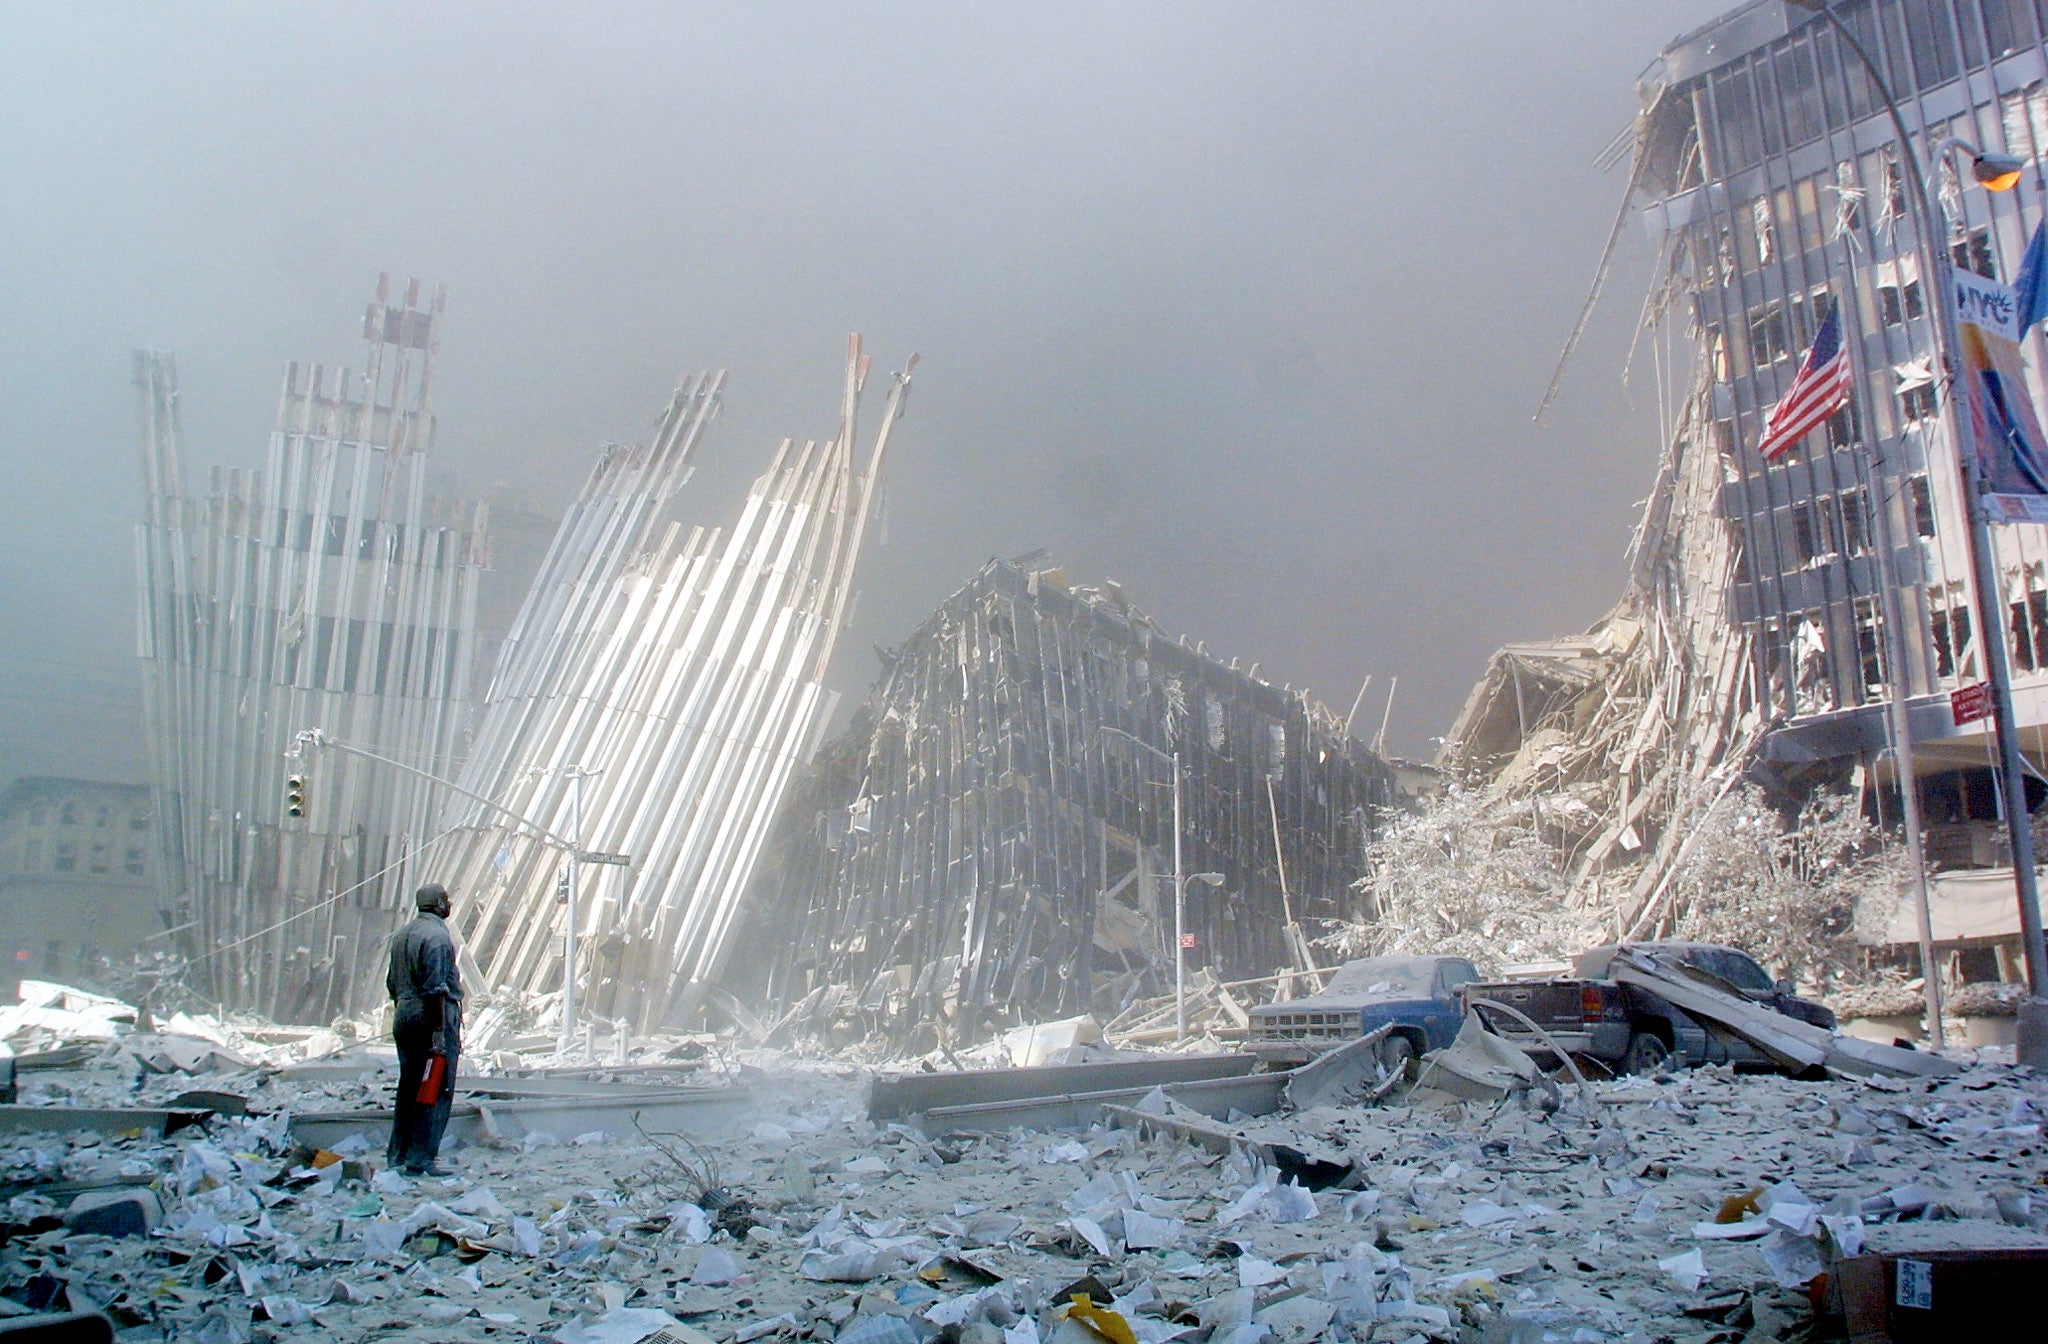 A man stands in the rubble, and calls out asking if anyone needs help, after the collapse of the first of the Twin Towers